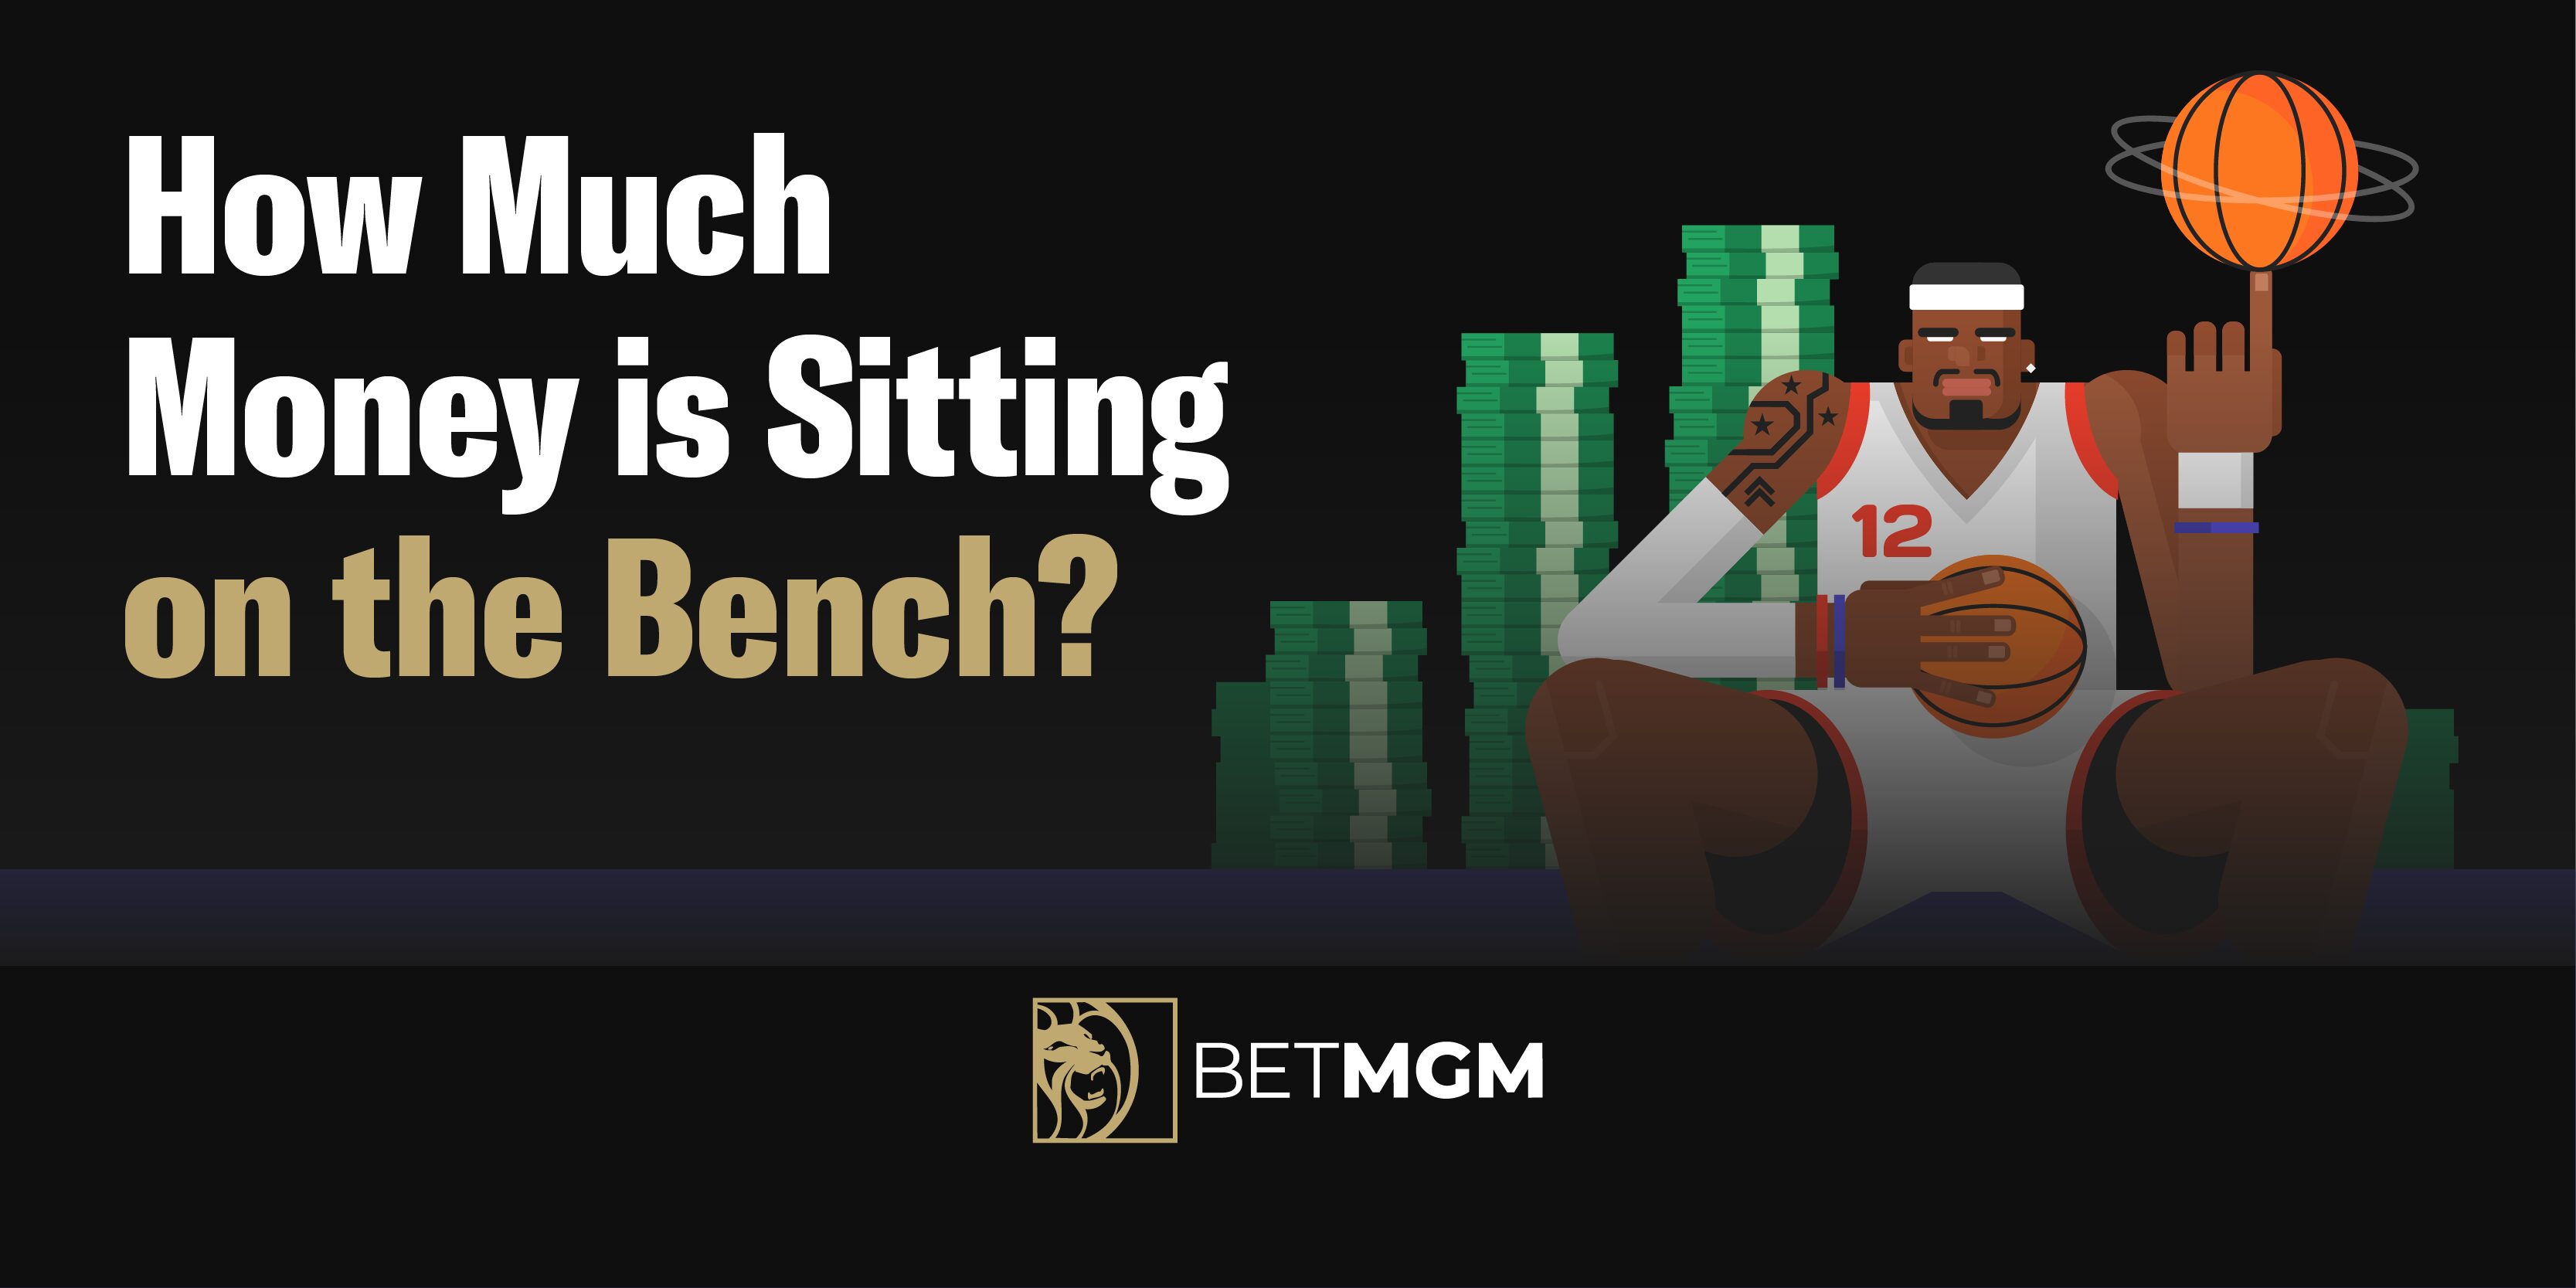 How Much Money is Sitting on the Bench?